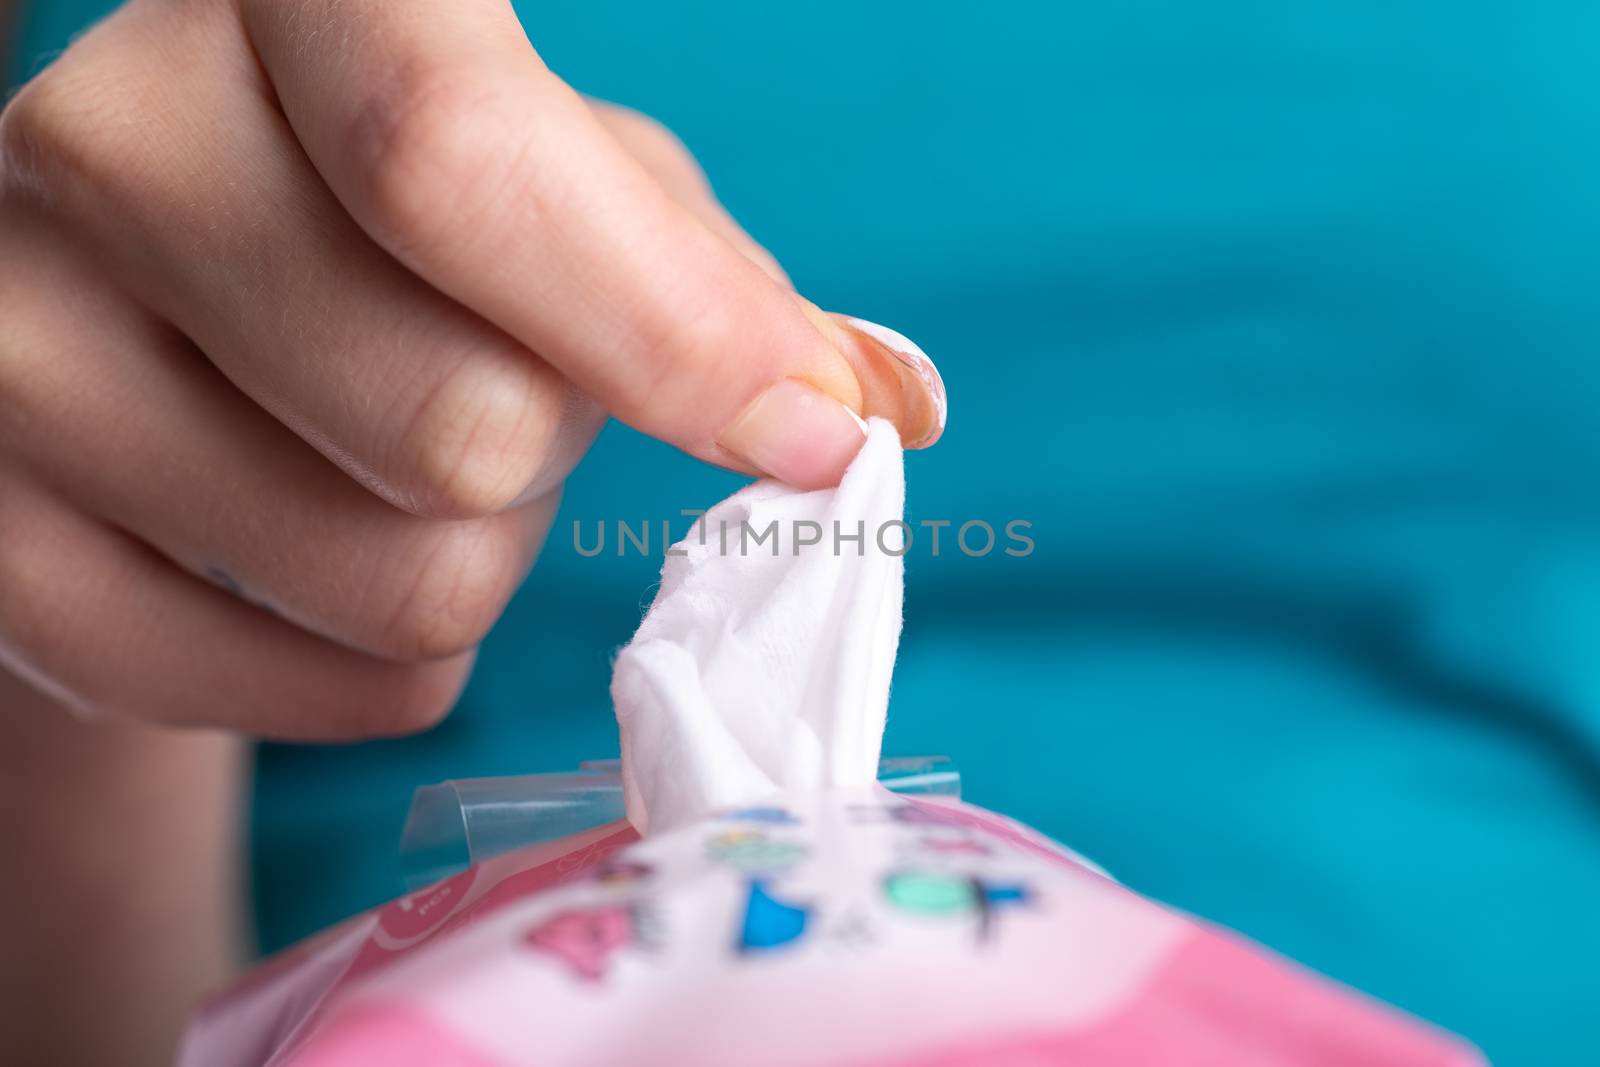 Taking baby wet wipes from the packaging - hygiene procedure and prevention of infectious diseases